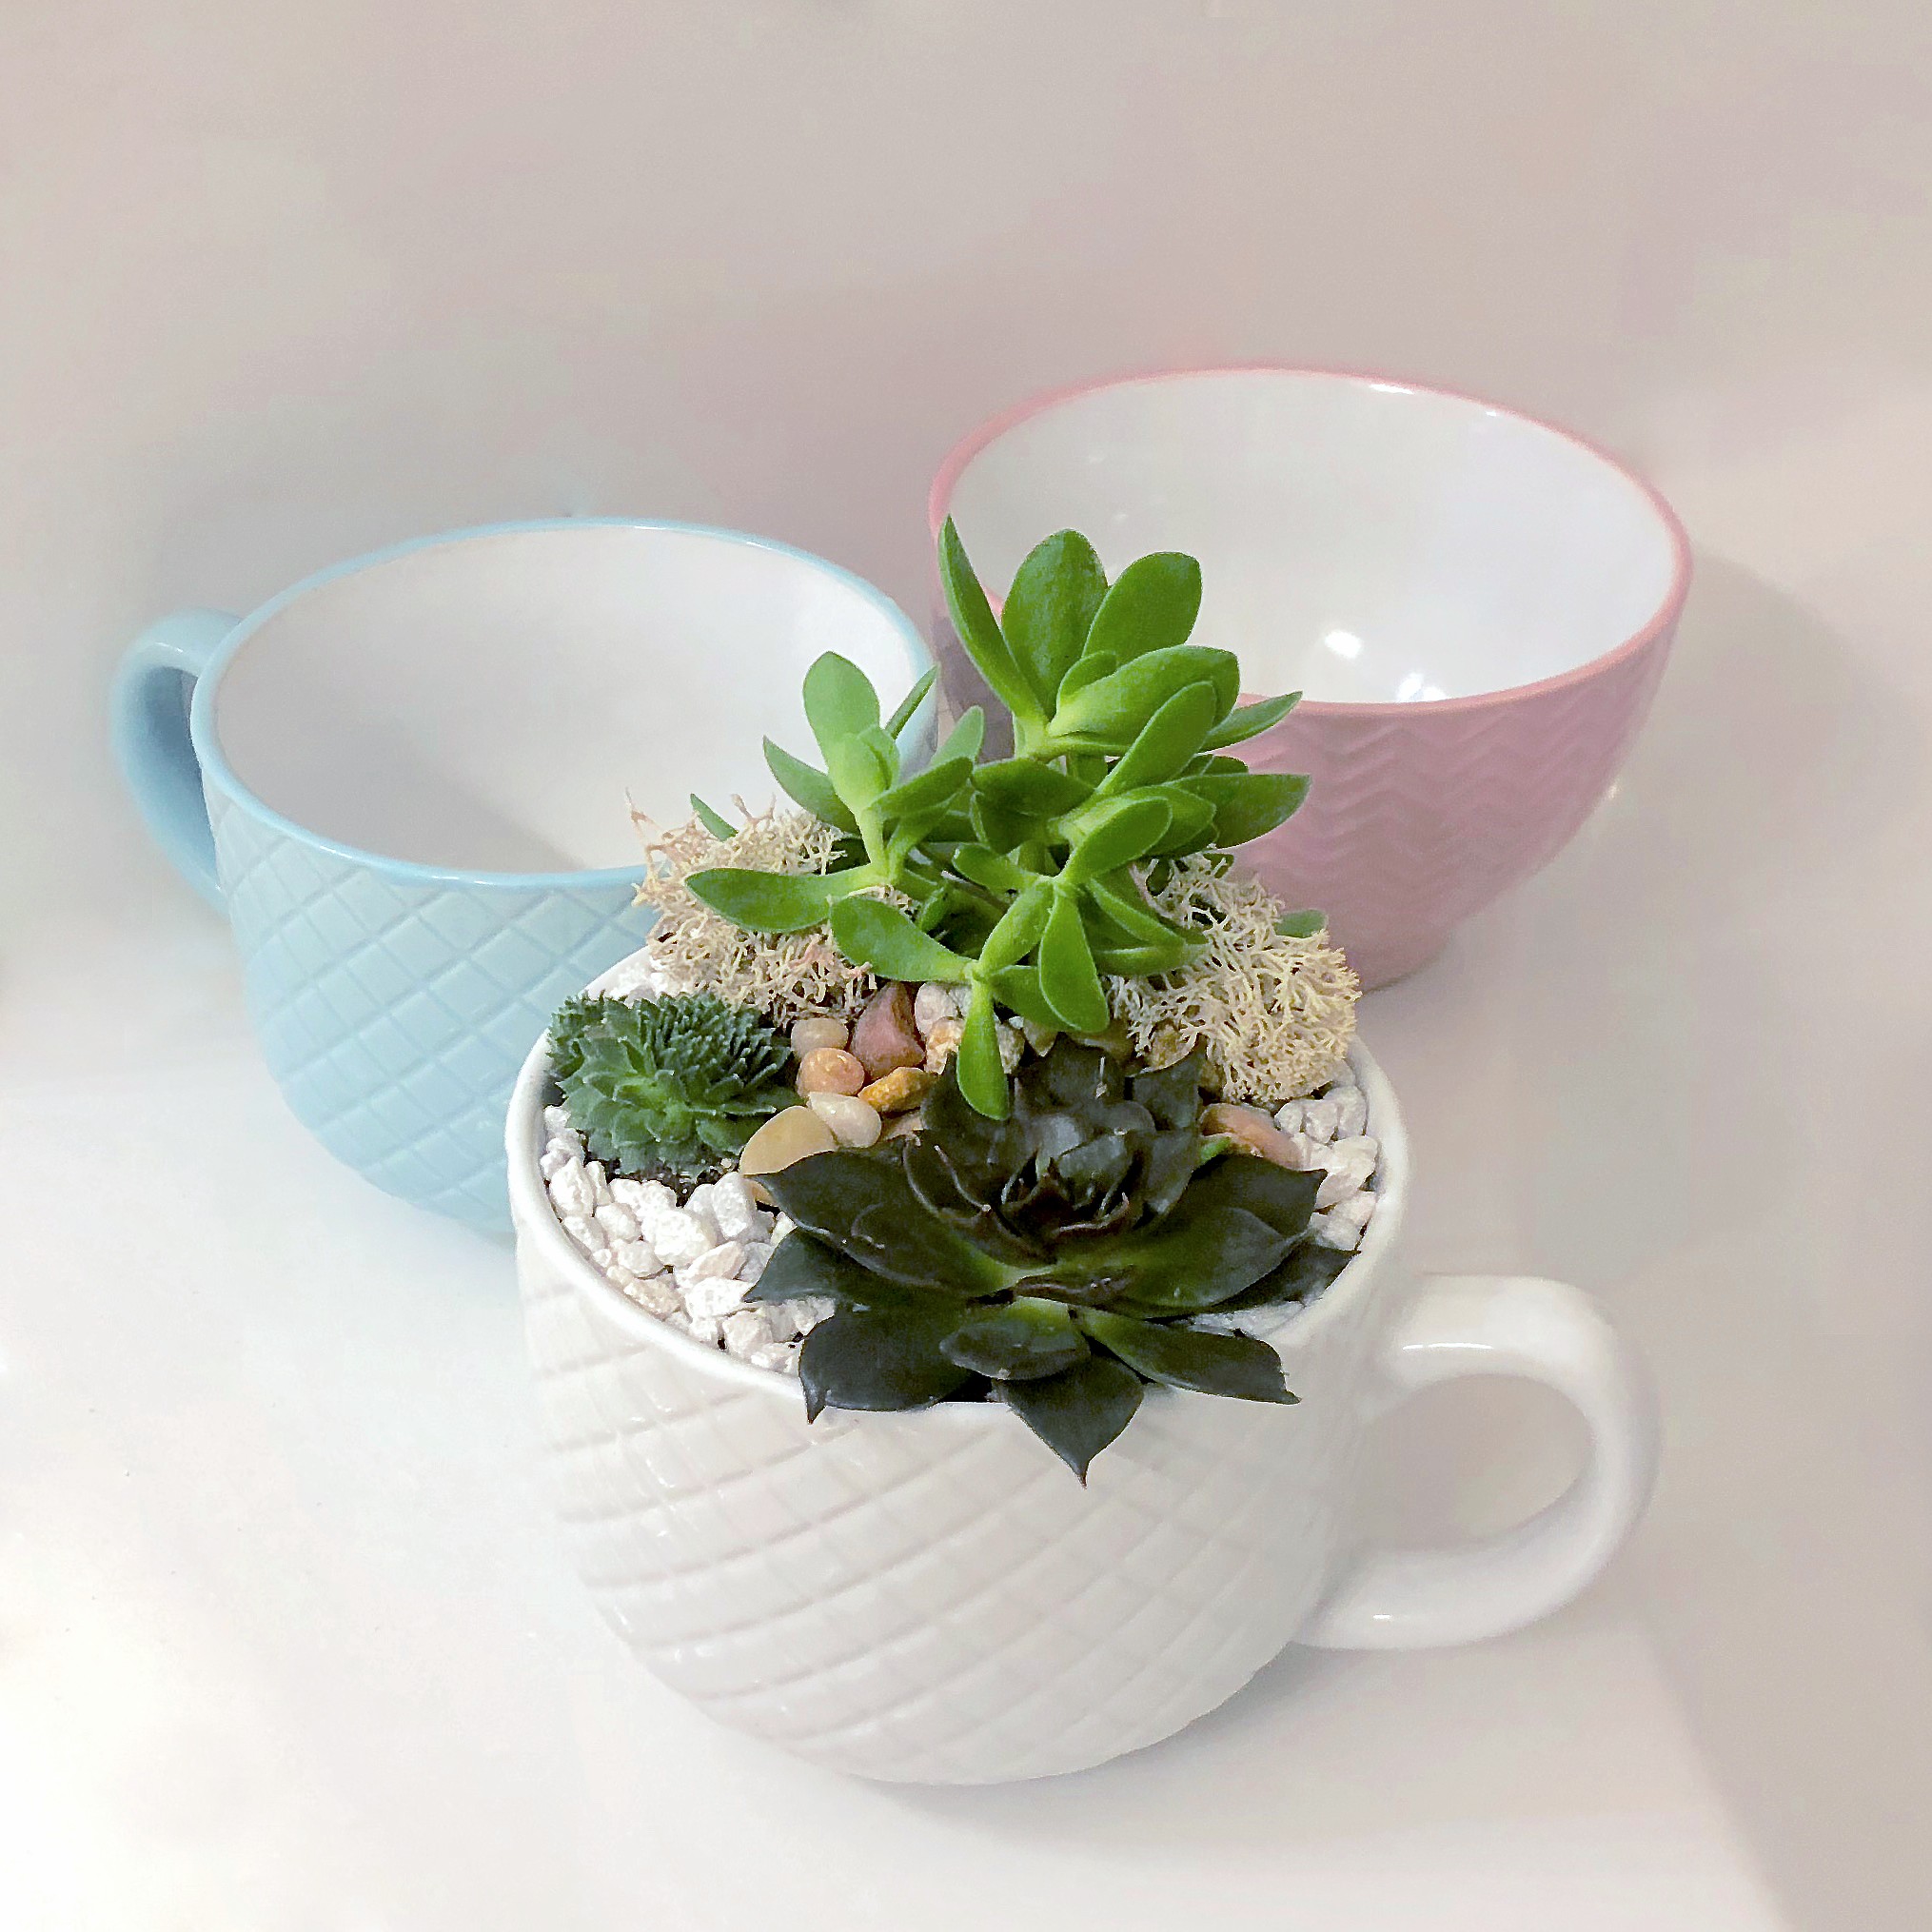 A Pick Your Cup of Love Succulent Garden plant nite project by Yaymaker